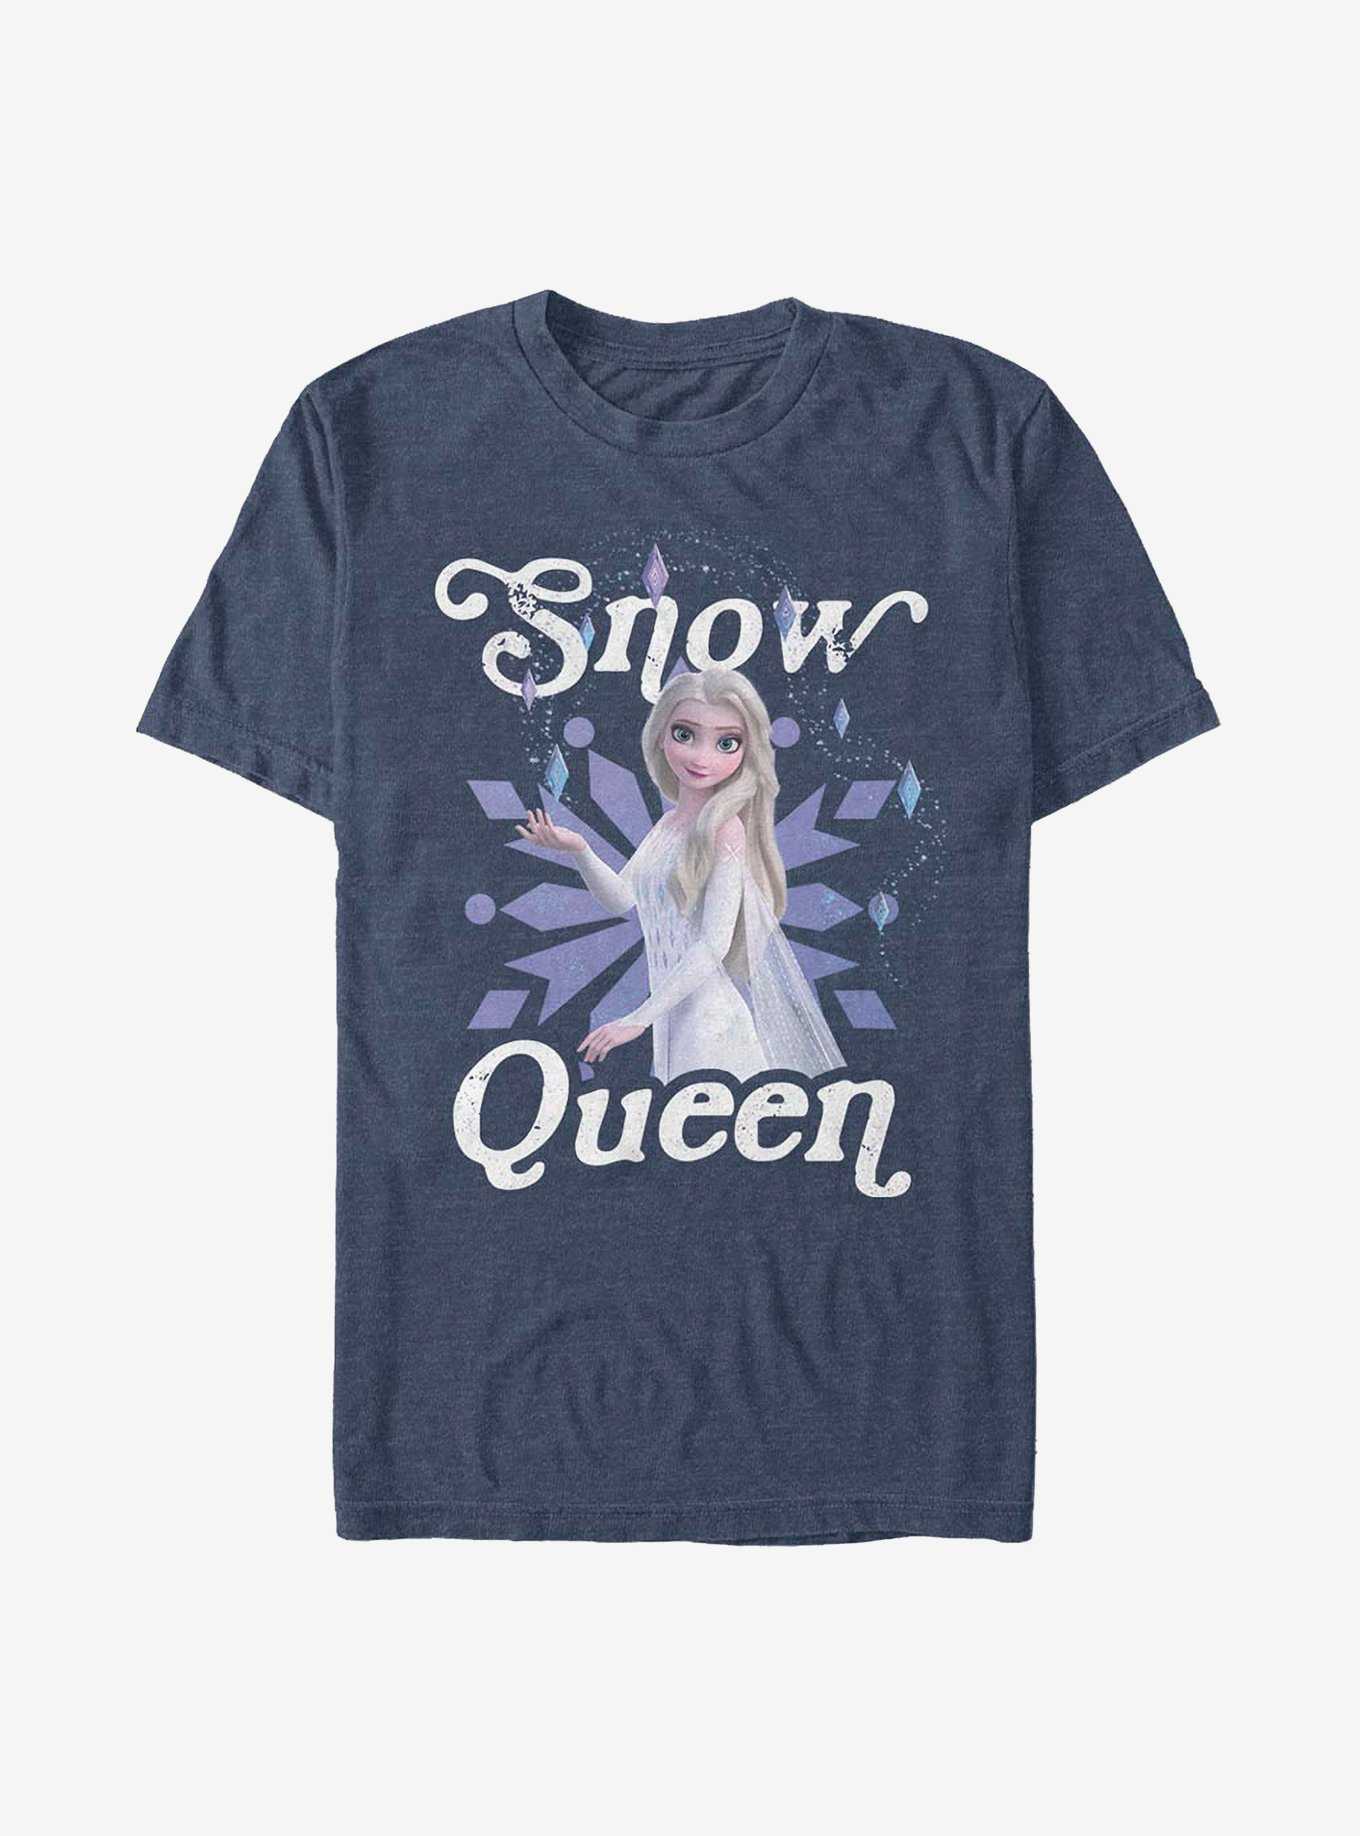 Frozen Clothing Shirts & Hot Topic OFFICIAL | Merchandise,